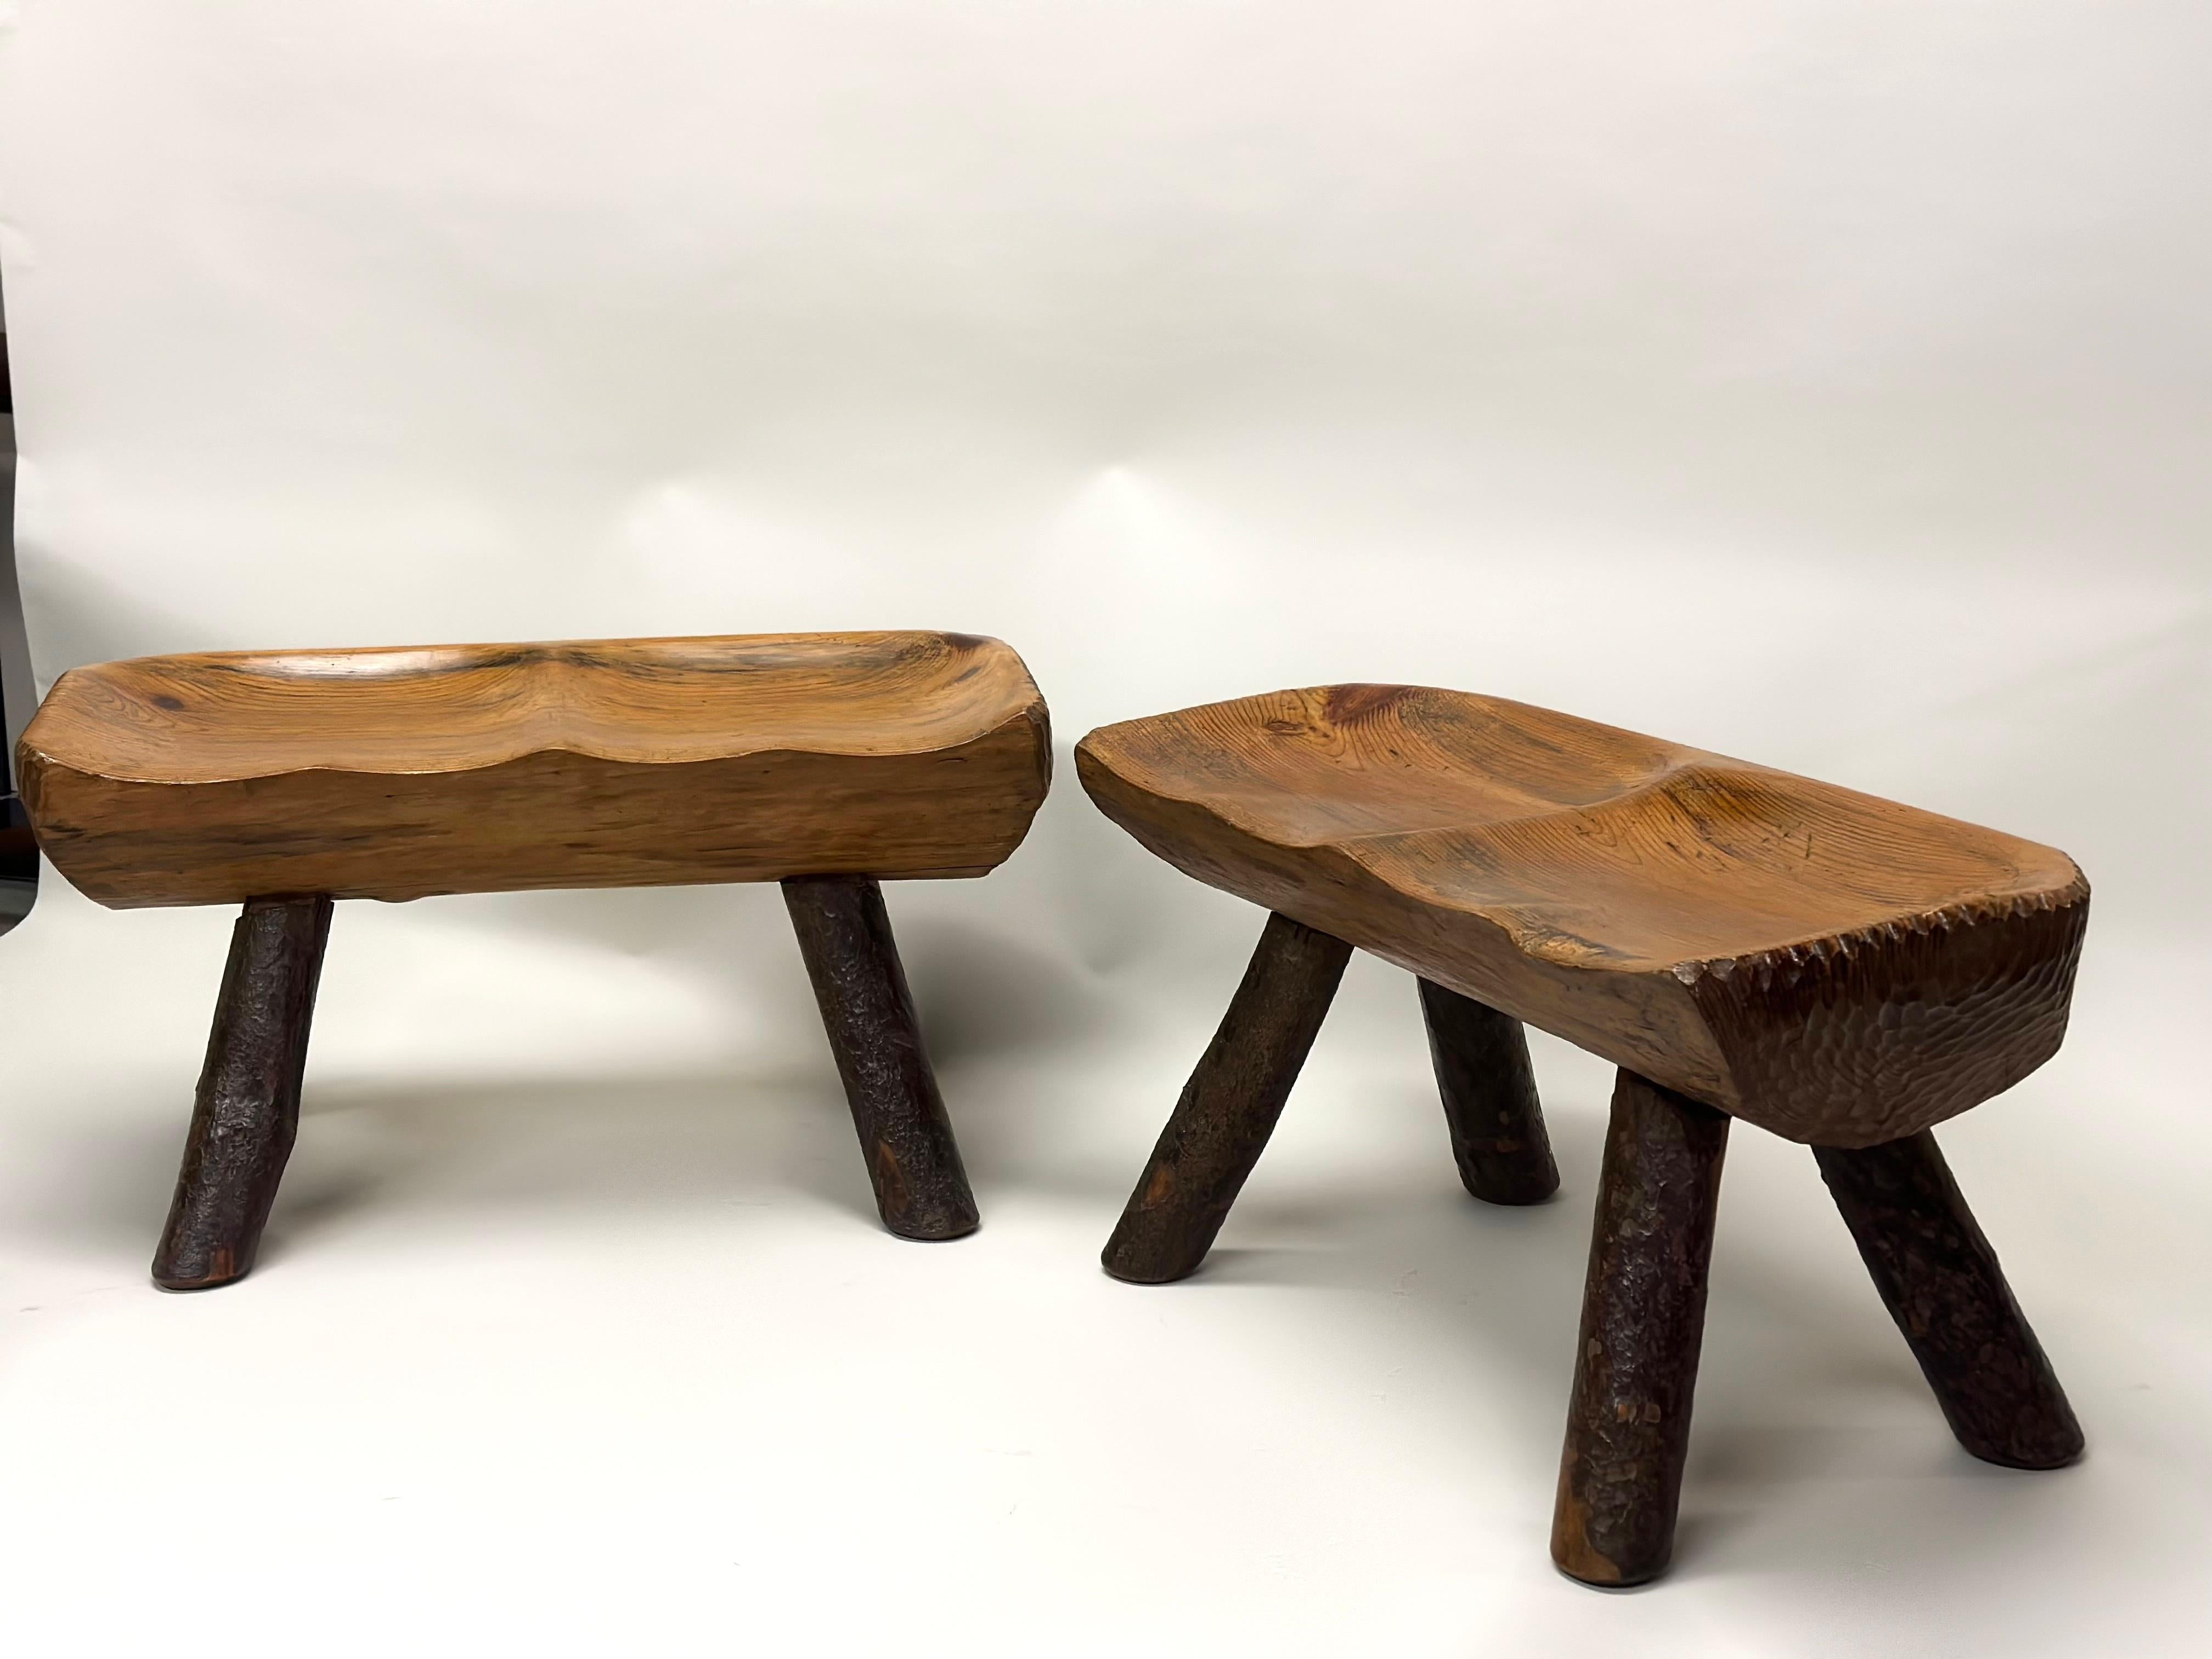 2 Rare Italian Modern Craftsman Alpine Benches in Hand Carved Cypress In Good Condition For Sale In New York, NY